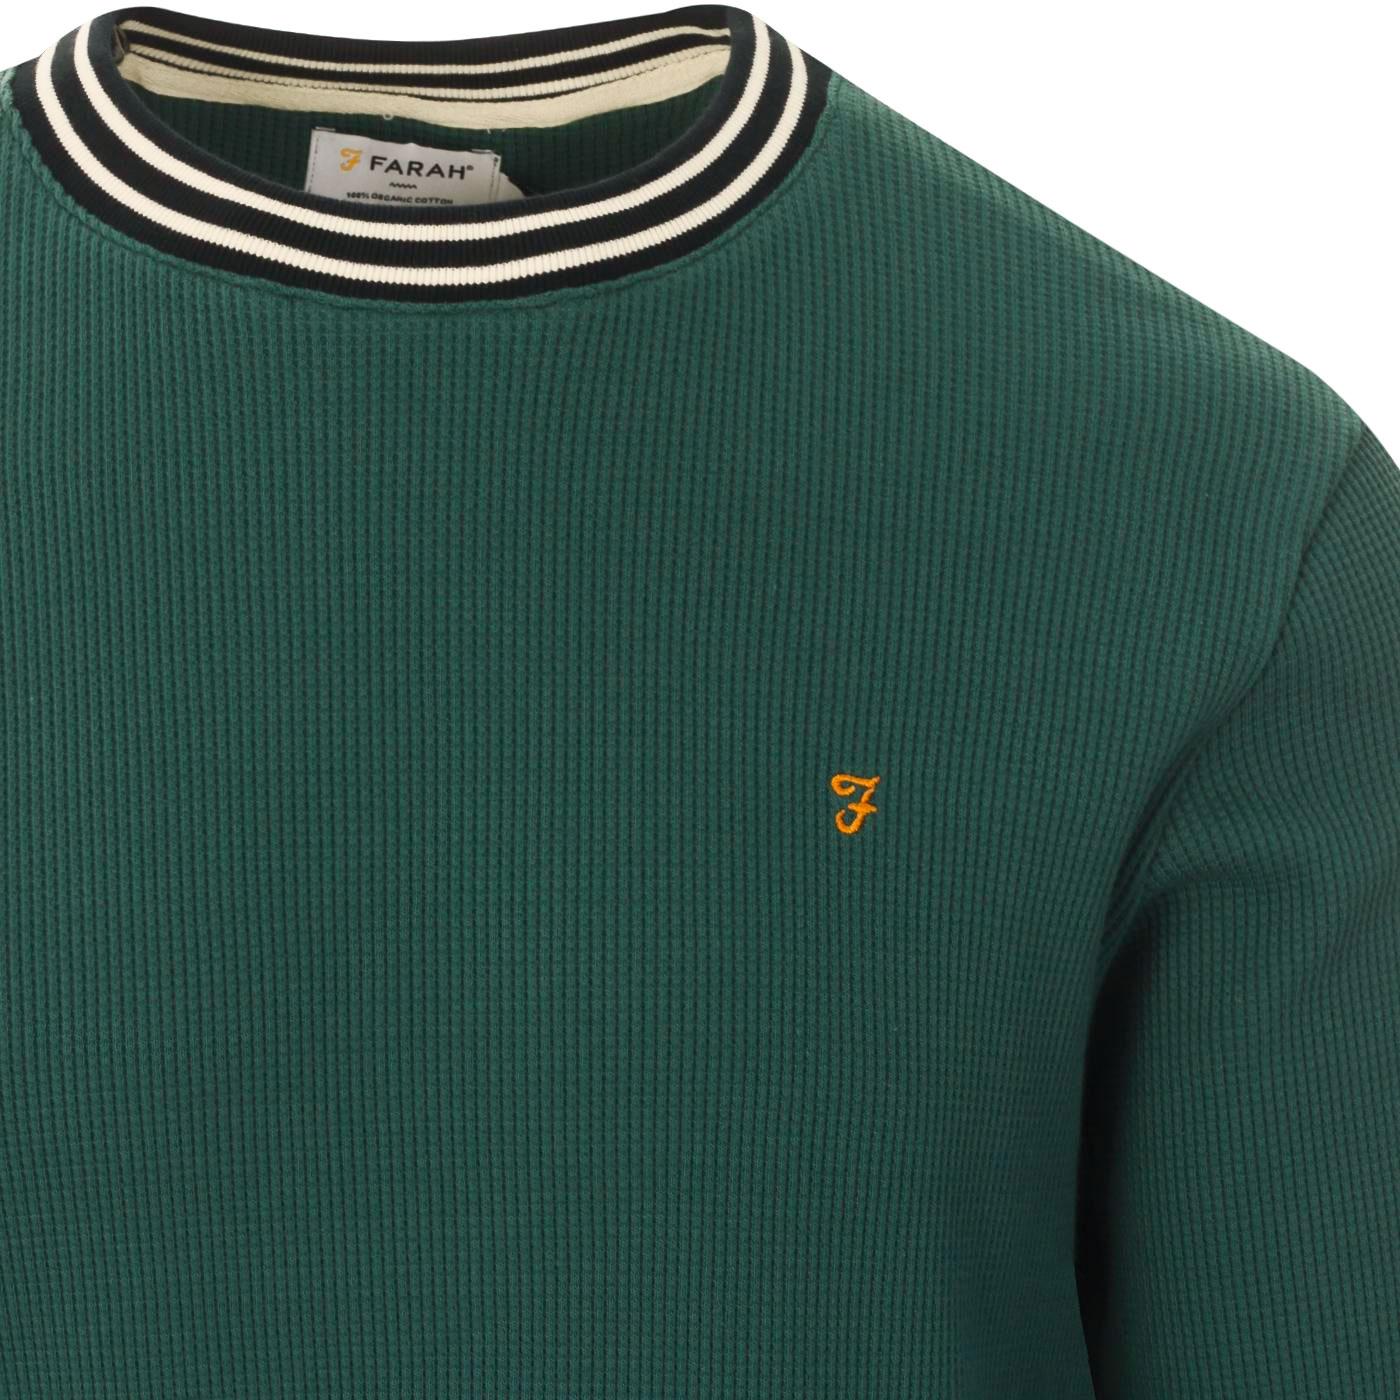 FARAH Copely Retro 60s Mod Tipped Waffle Jumper in Pine